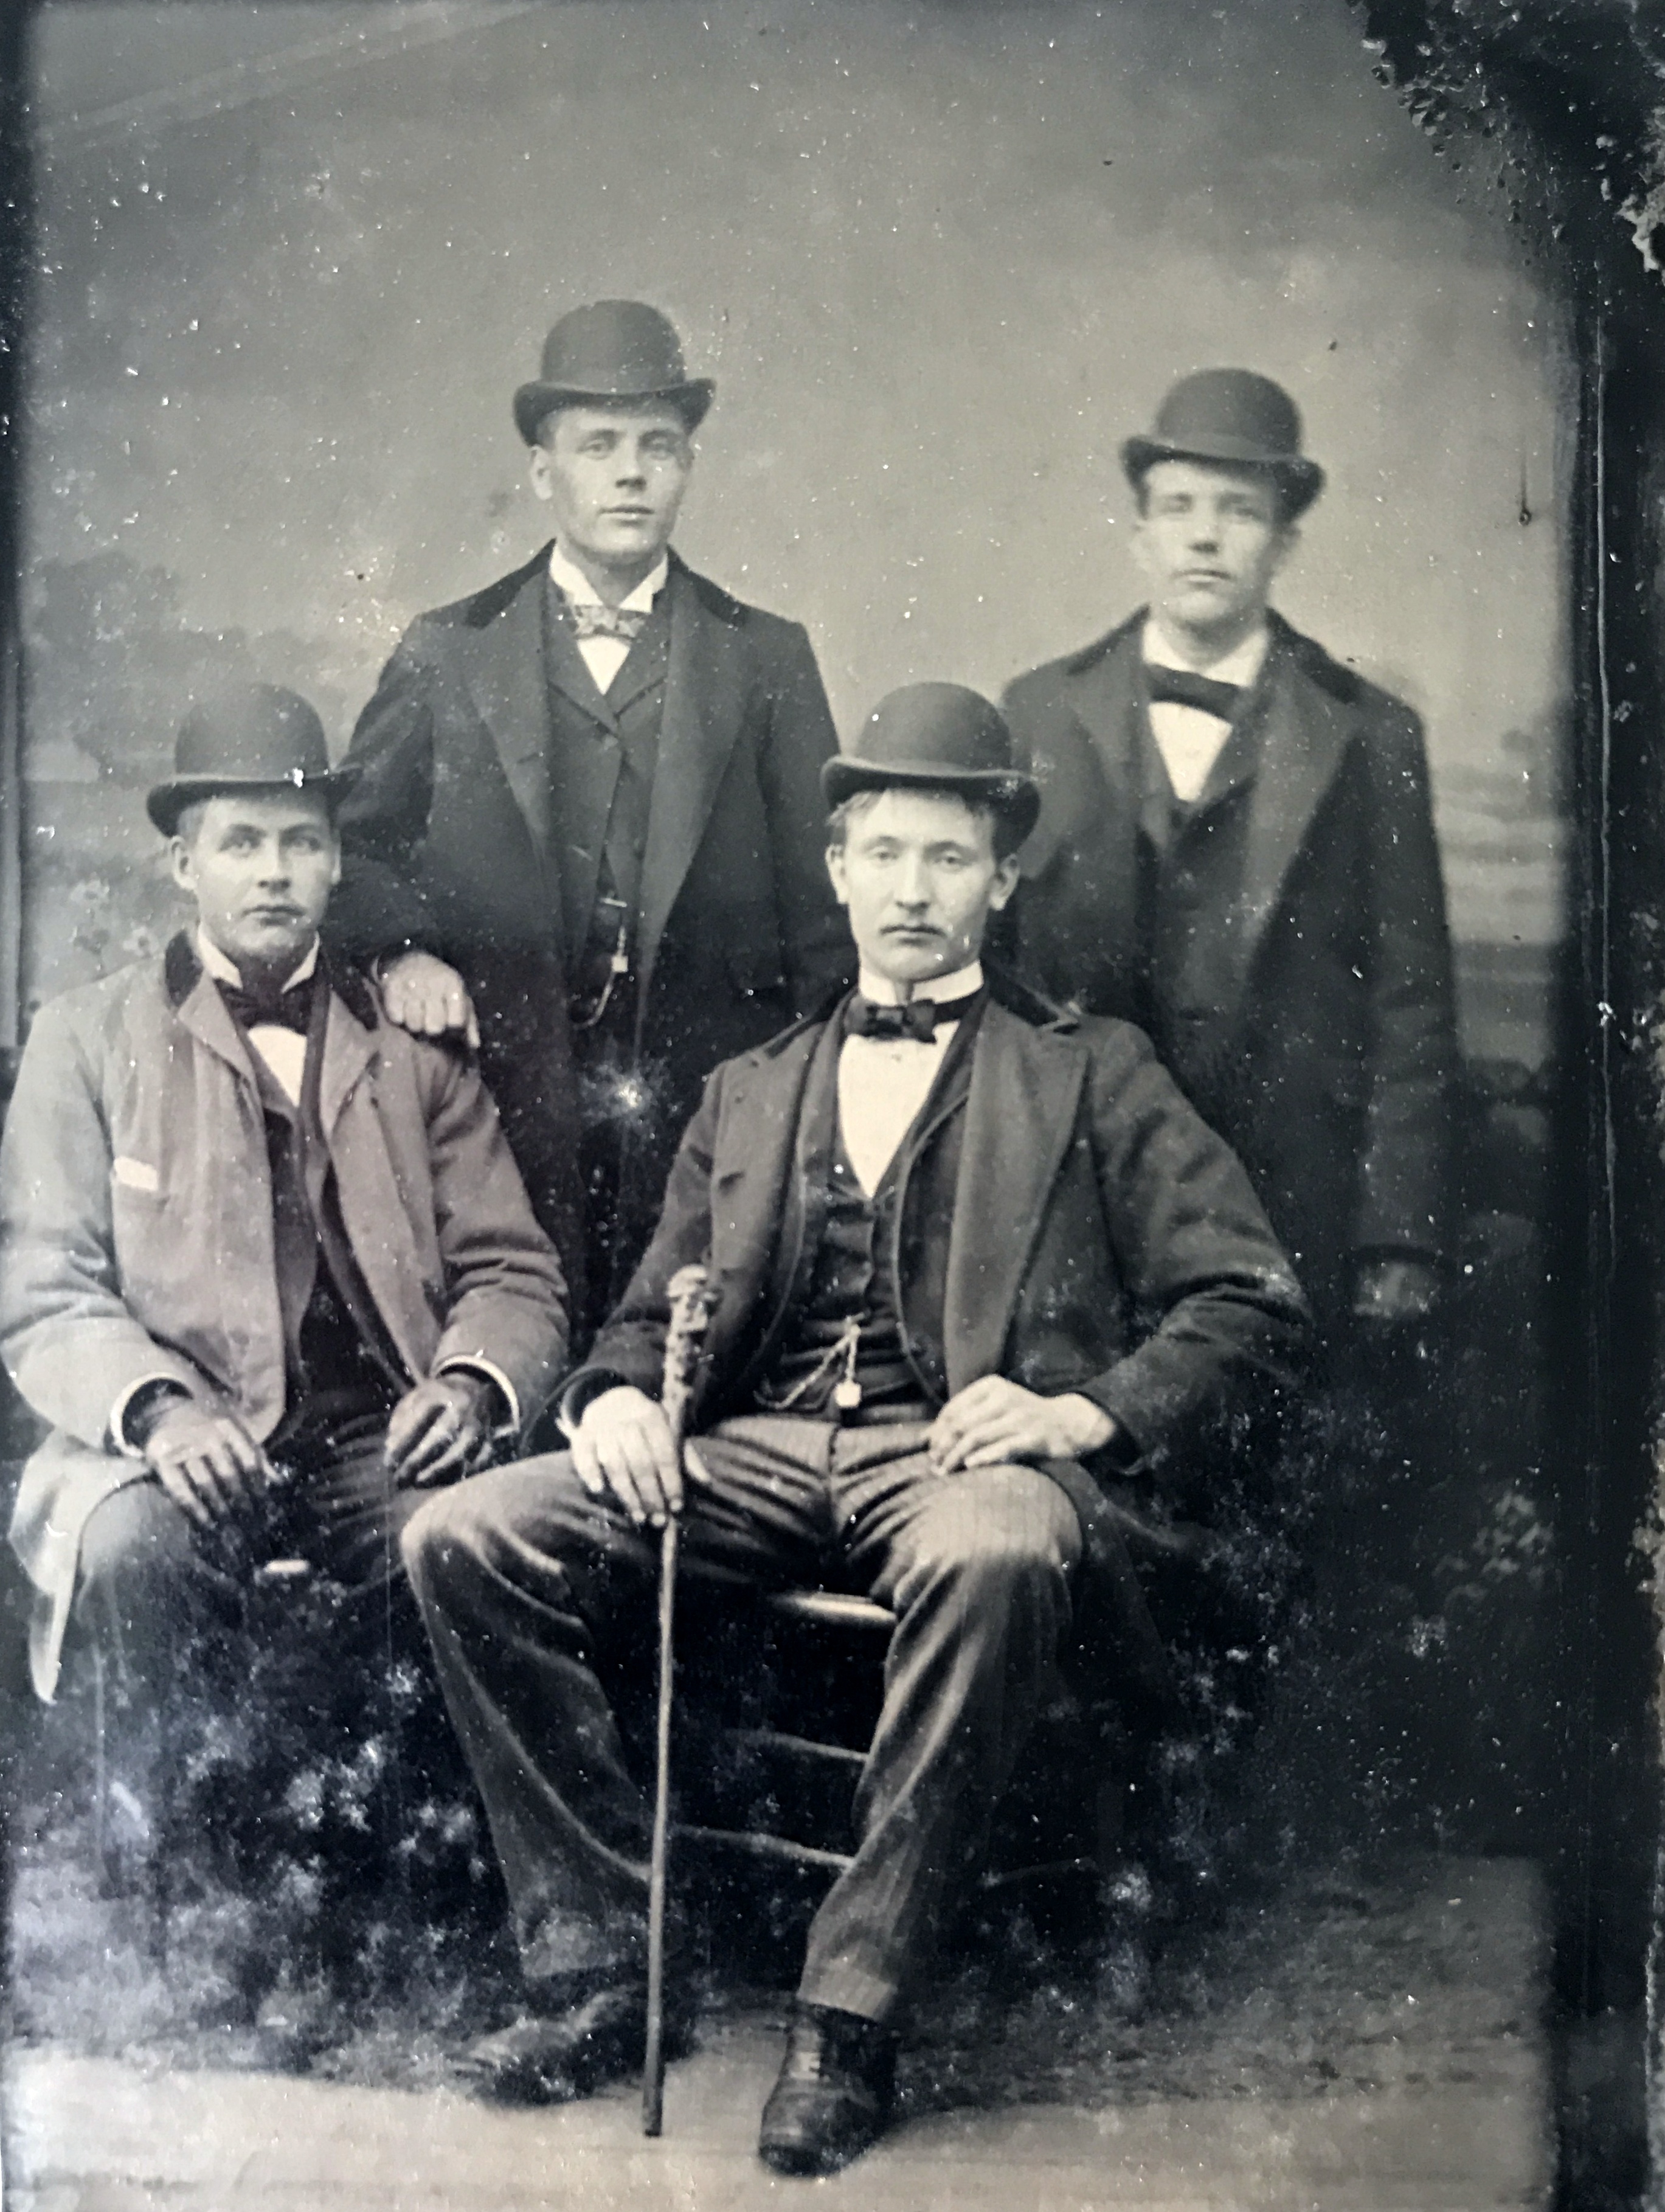 Two brothers with two friends in Plainfield, NJ 1893